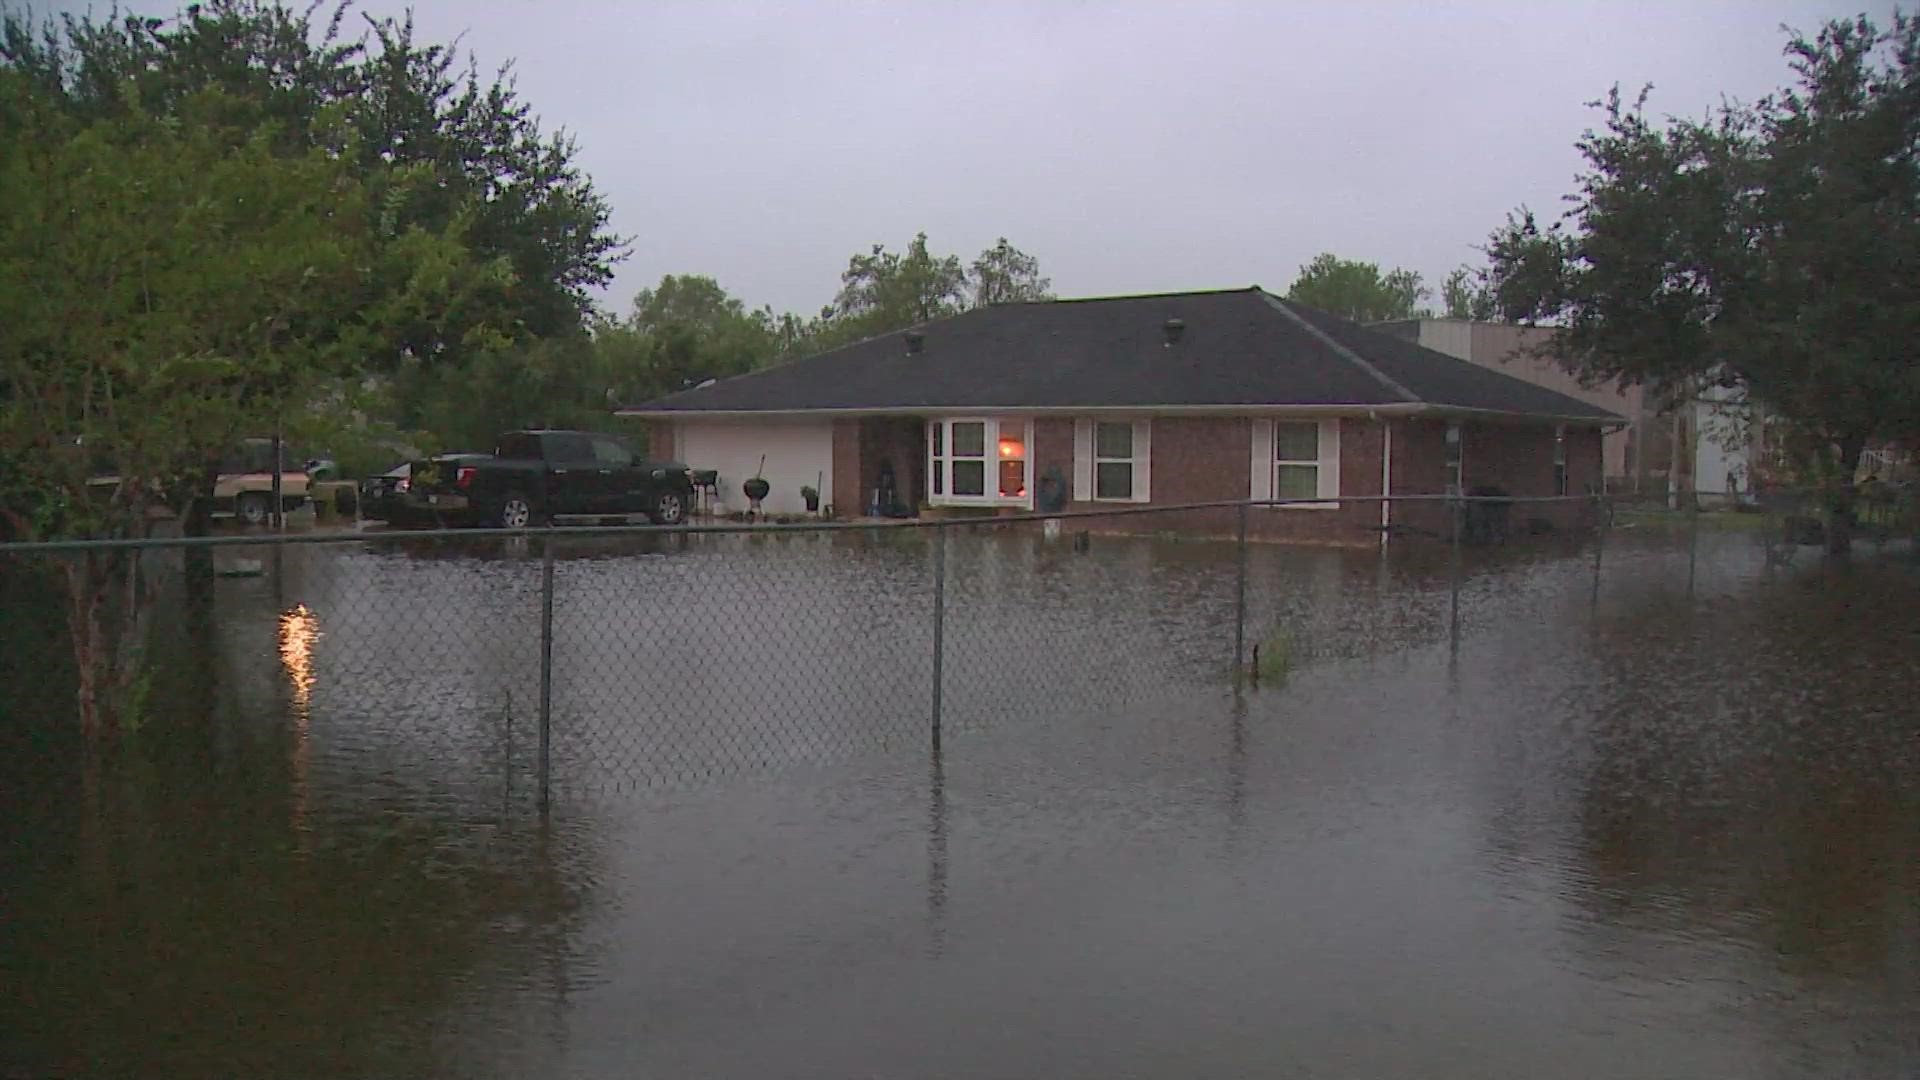 Most of the flooding issues were limited to communities along the Texas coast early Tuesday